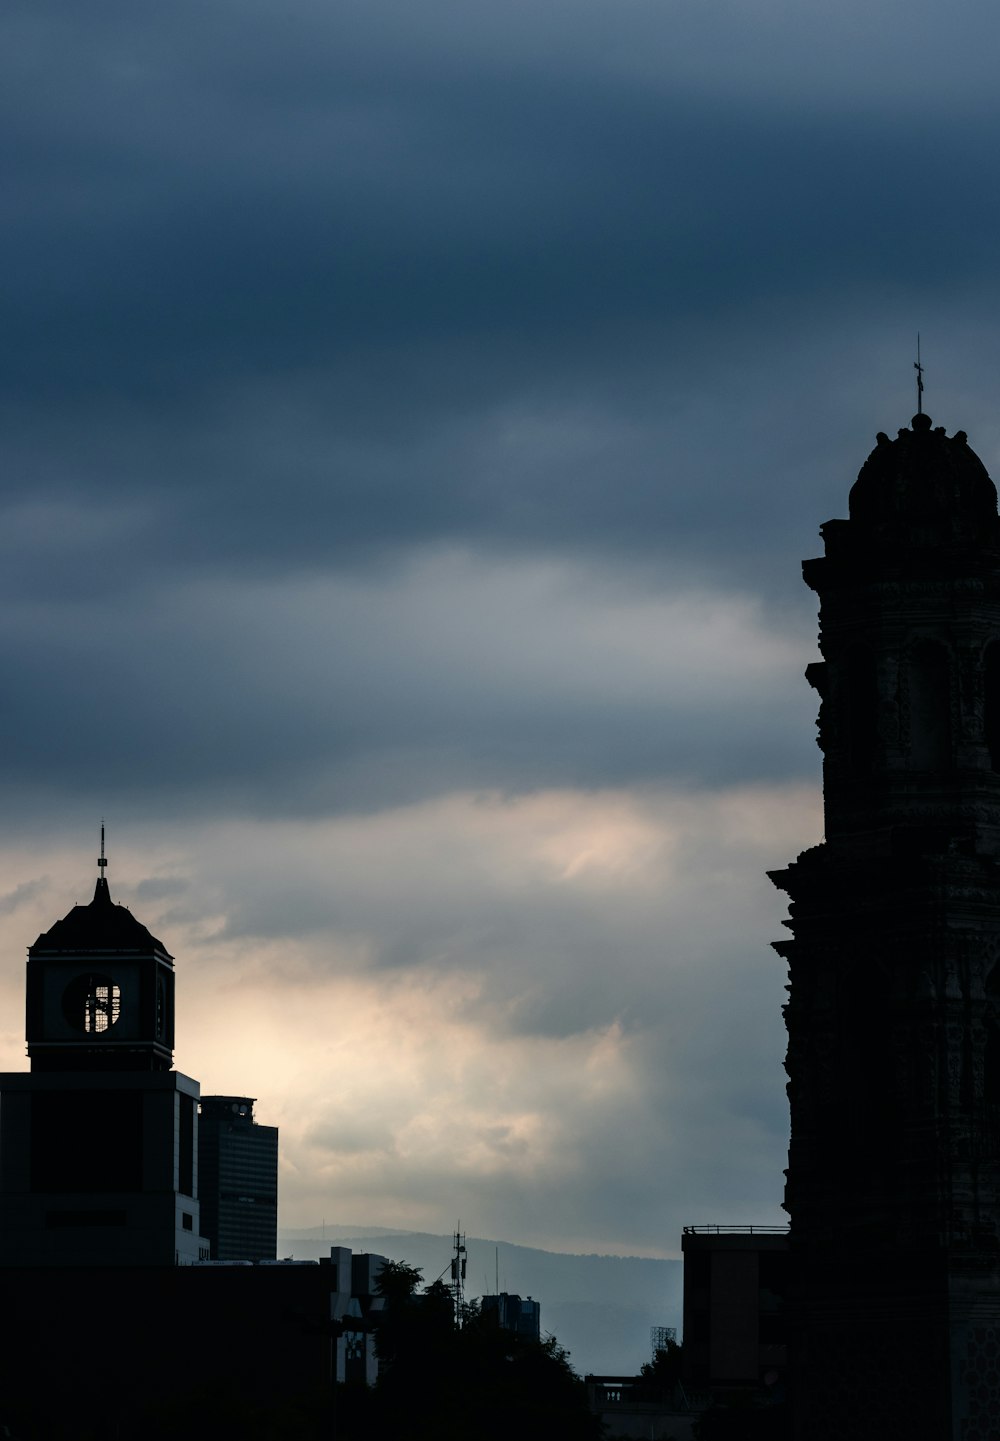 a large clock tower towering over a city under a cloudy sky